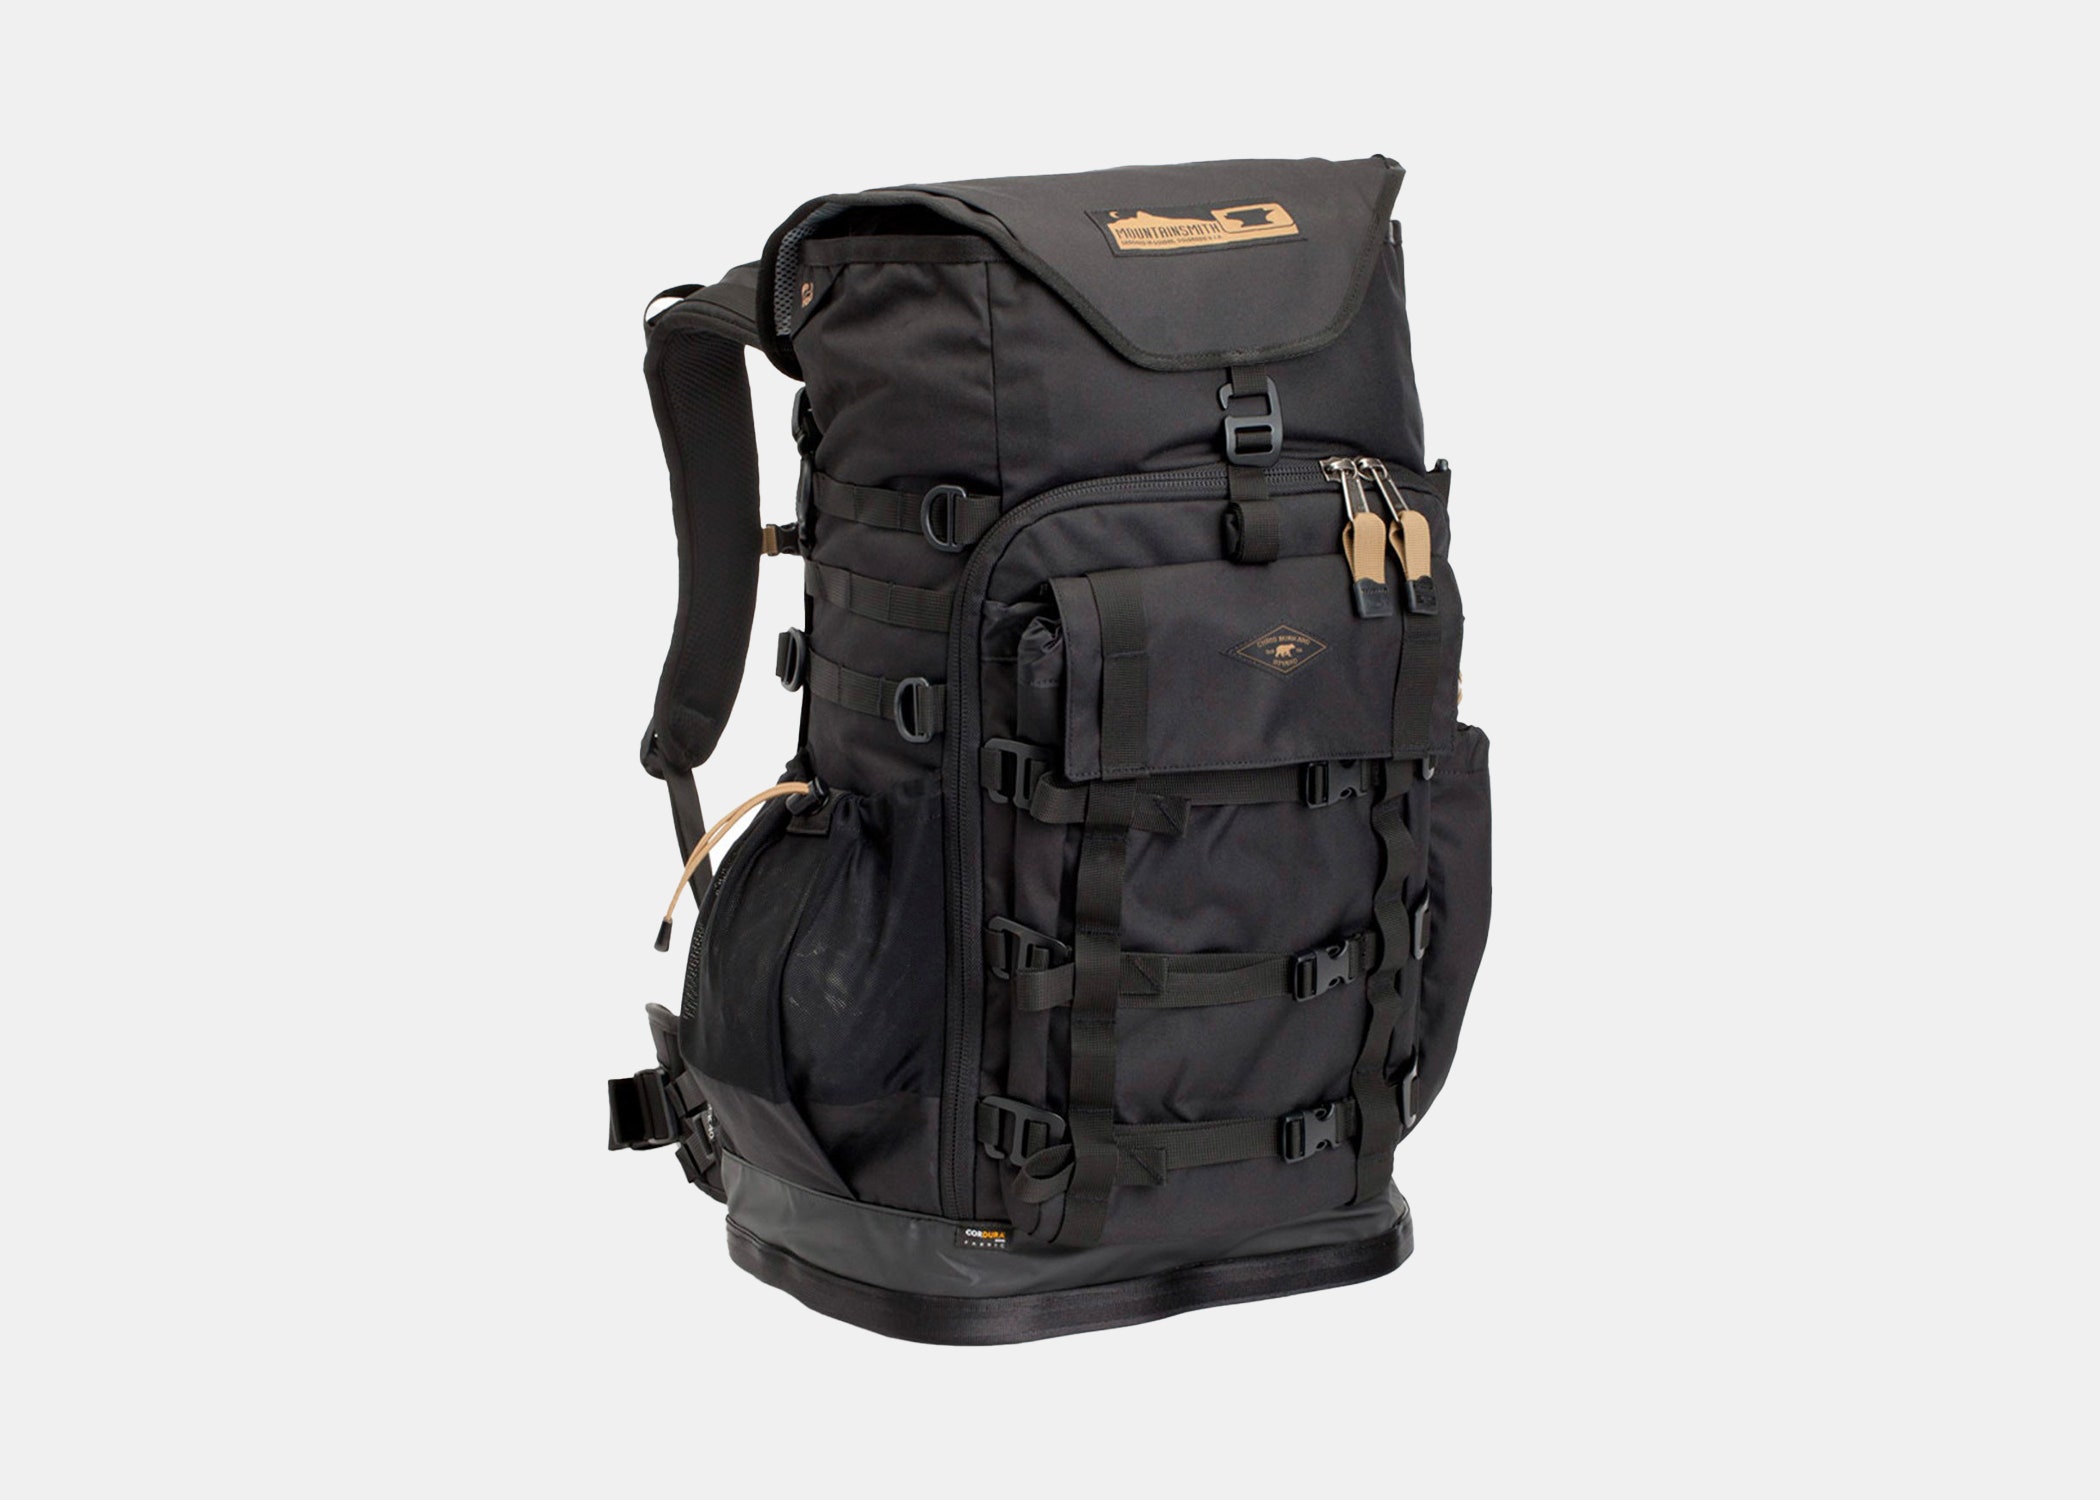 <p><strong>Best for backpacking</strong></p> <p>Mountainsmith’s Tanuck backpack was designed in collaboration with landscape and adventure photographer <a href="https://www.cntraveler.com/story/10-adventure-instagrammers-you-should-be-following?mbid=synd_msn_rss&utm_source=msn&utm_medium=syndication">Chris Burkard</a>. Tough Cordura fabric means it is as durable as camera bags get. And for practical purposes, it might as well be Hermione’s bottomless bag from <em>Harry Potter and the Deathly Hallows</em>: There's enough space for tripods, lenses, light stands, and accessories to go inside this 40-liter daypack.</p> <p><strong>Noteworthy features</strong>: Hydration sleeve to drink water through, hip belt, storm collar, and rain cover</p> $230, Mountainsmith. <a href="https://mountainsmith.com/products/tanuck-40-camera-backpack">Get it now!</a><p>Sign up to receive the latest news, expert tips, and inspiration on all things travel</p><a href="https://www.cntraveler.com/newsletter/the-daily?sourceCode=msnsend">Inspire Me</a>